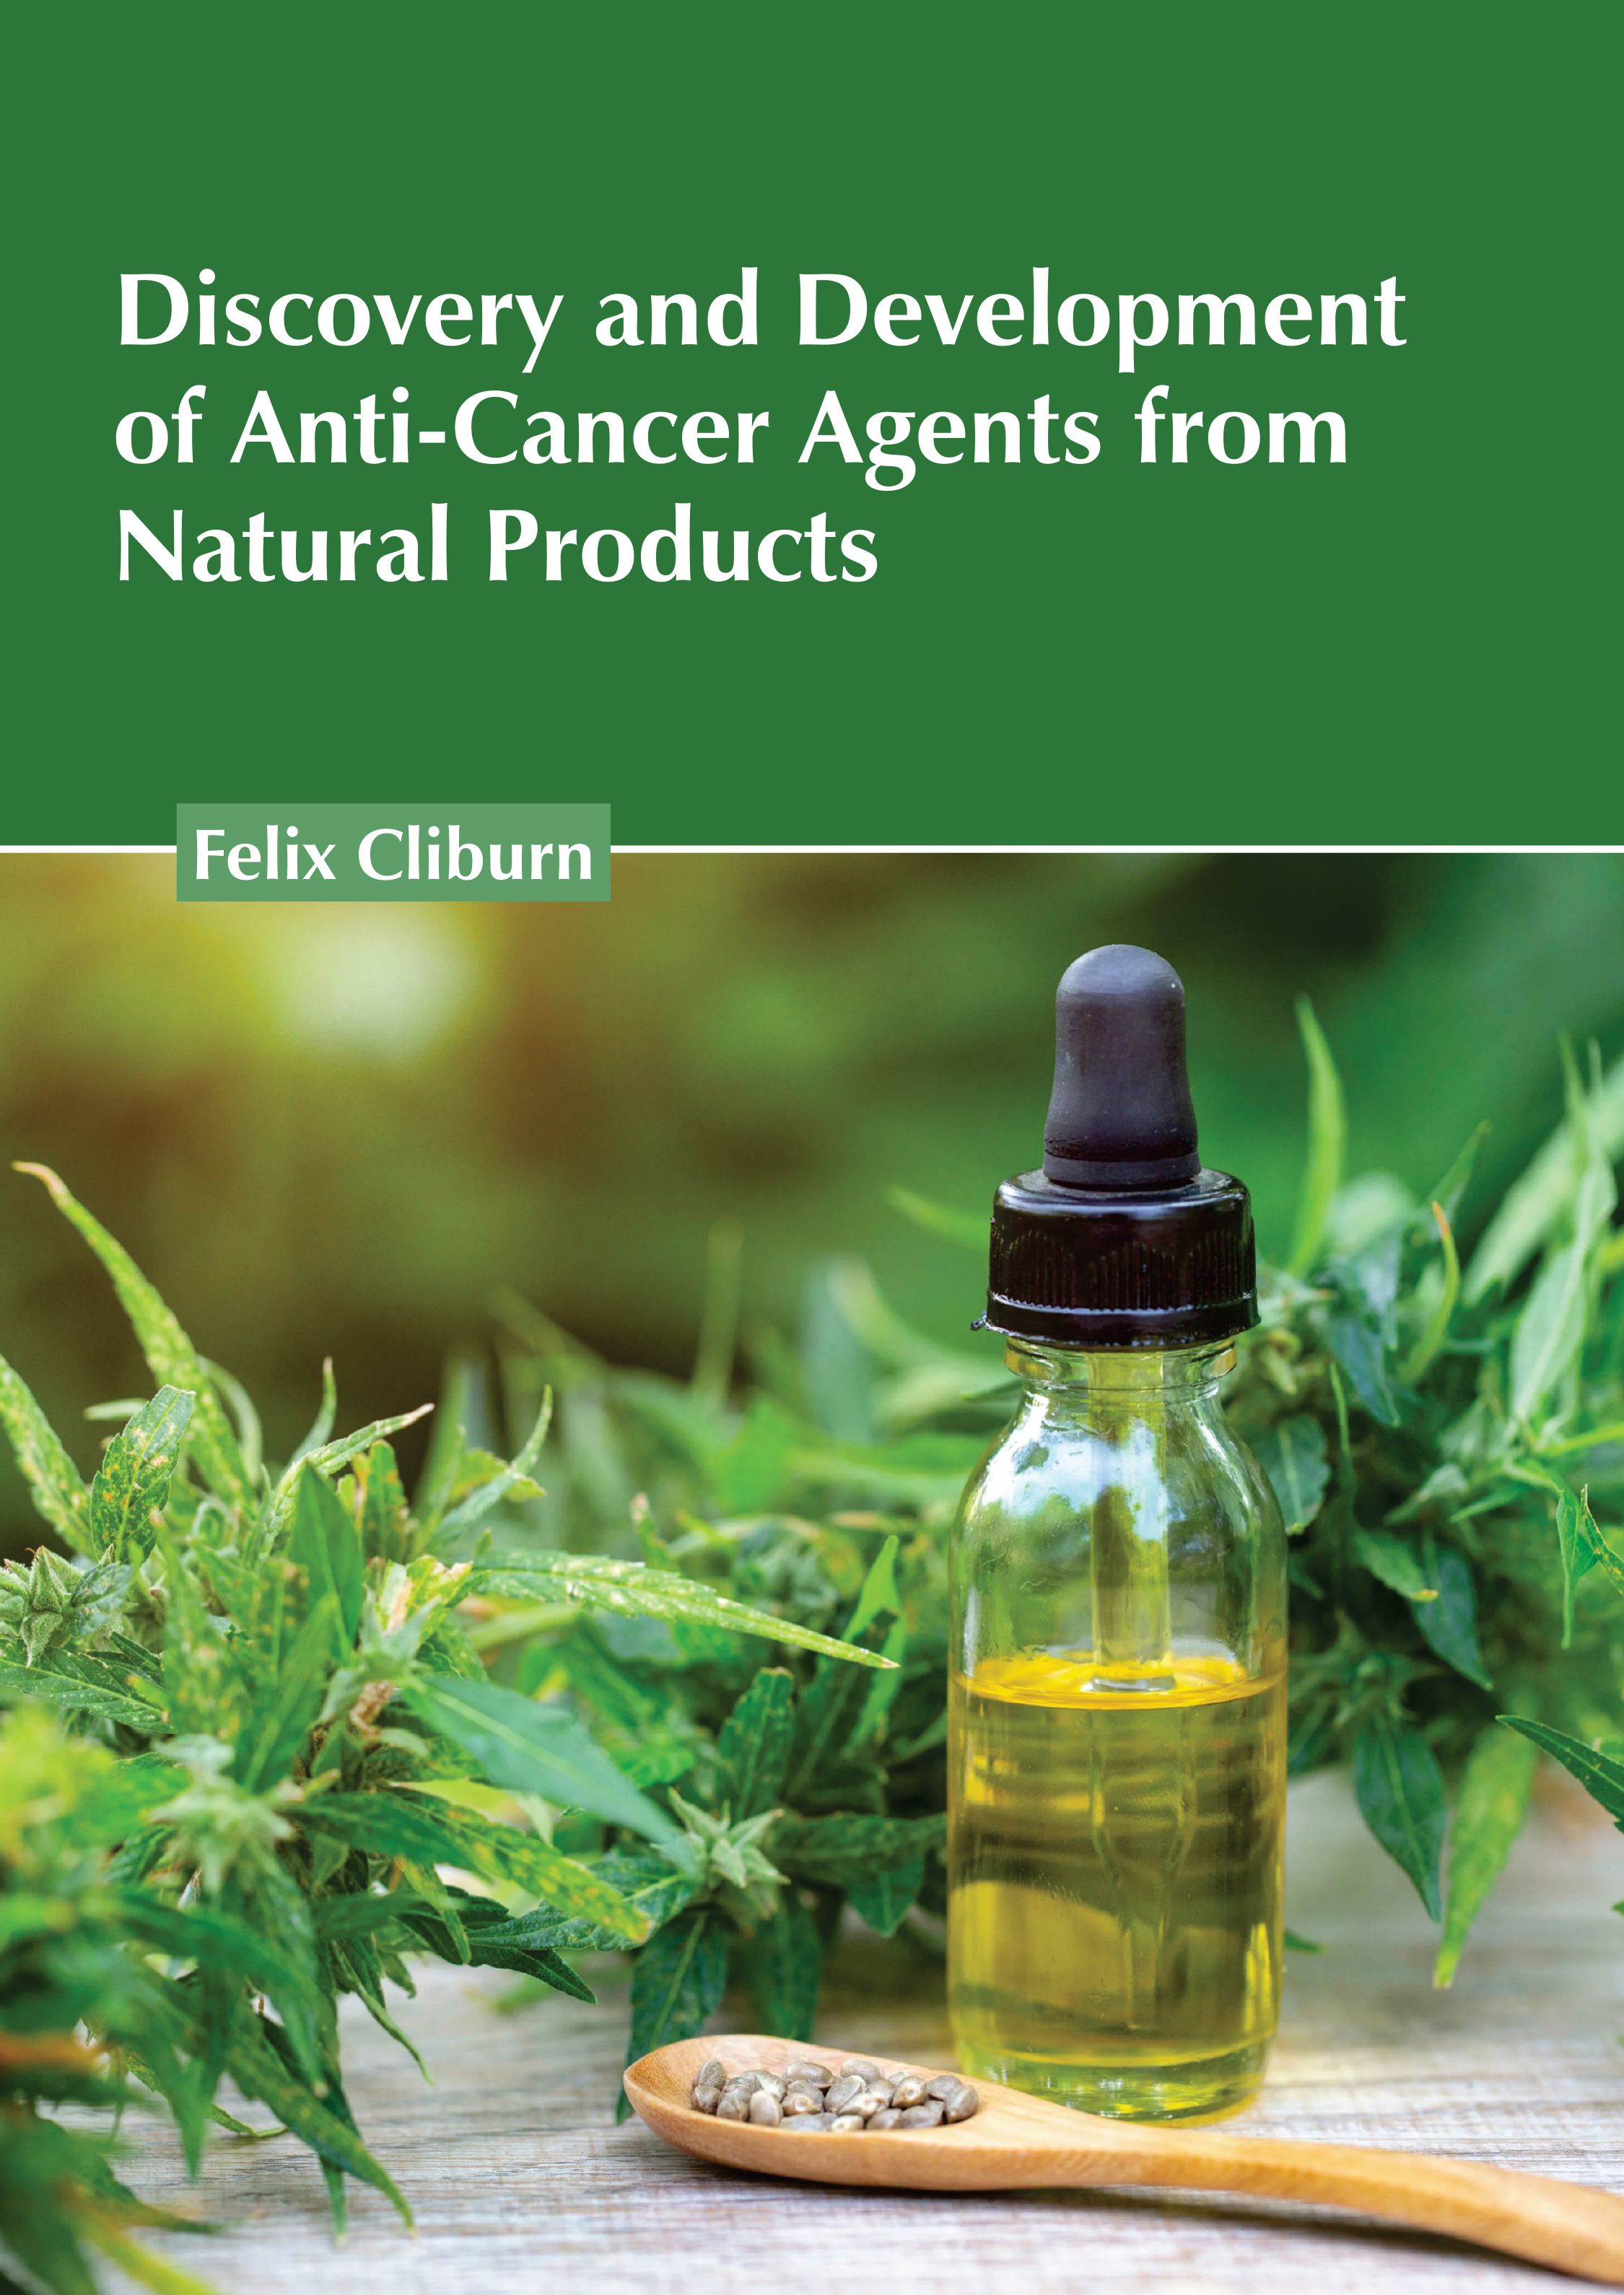 

exclusive-publishers/american-medical-publishers/discovery-and-development-of-anti-cancer-agents-from-natural-products-9798887400648